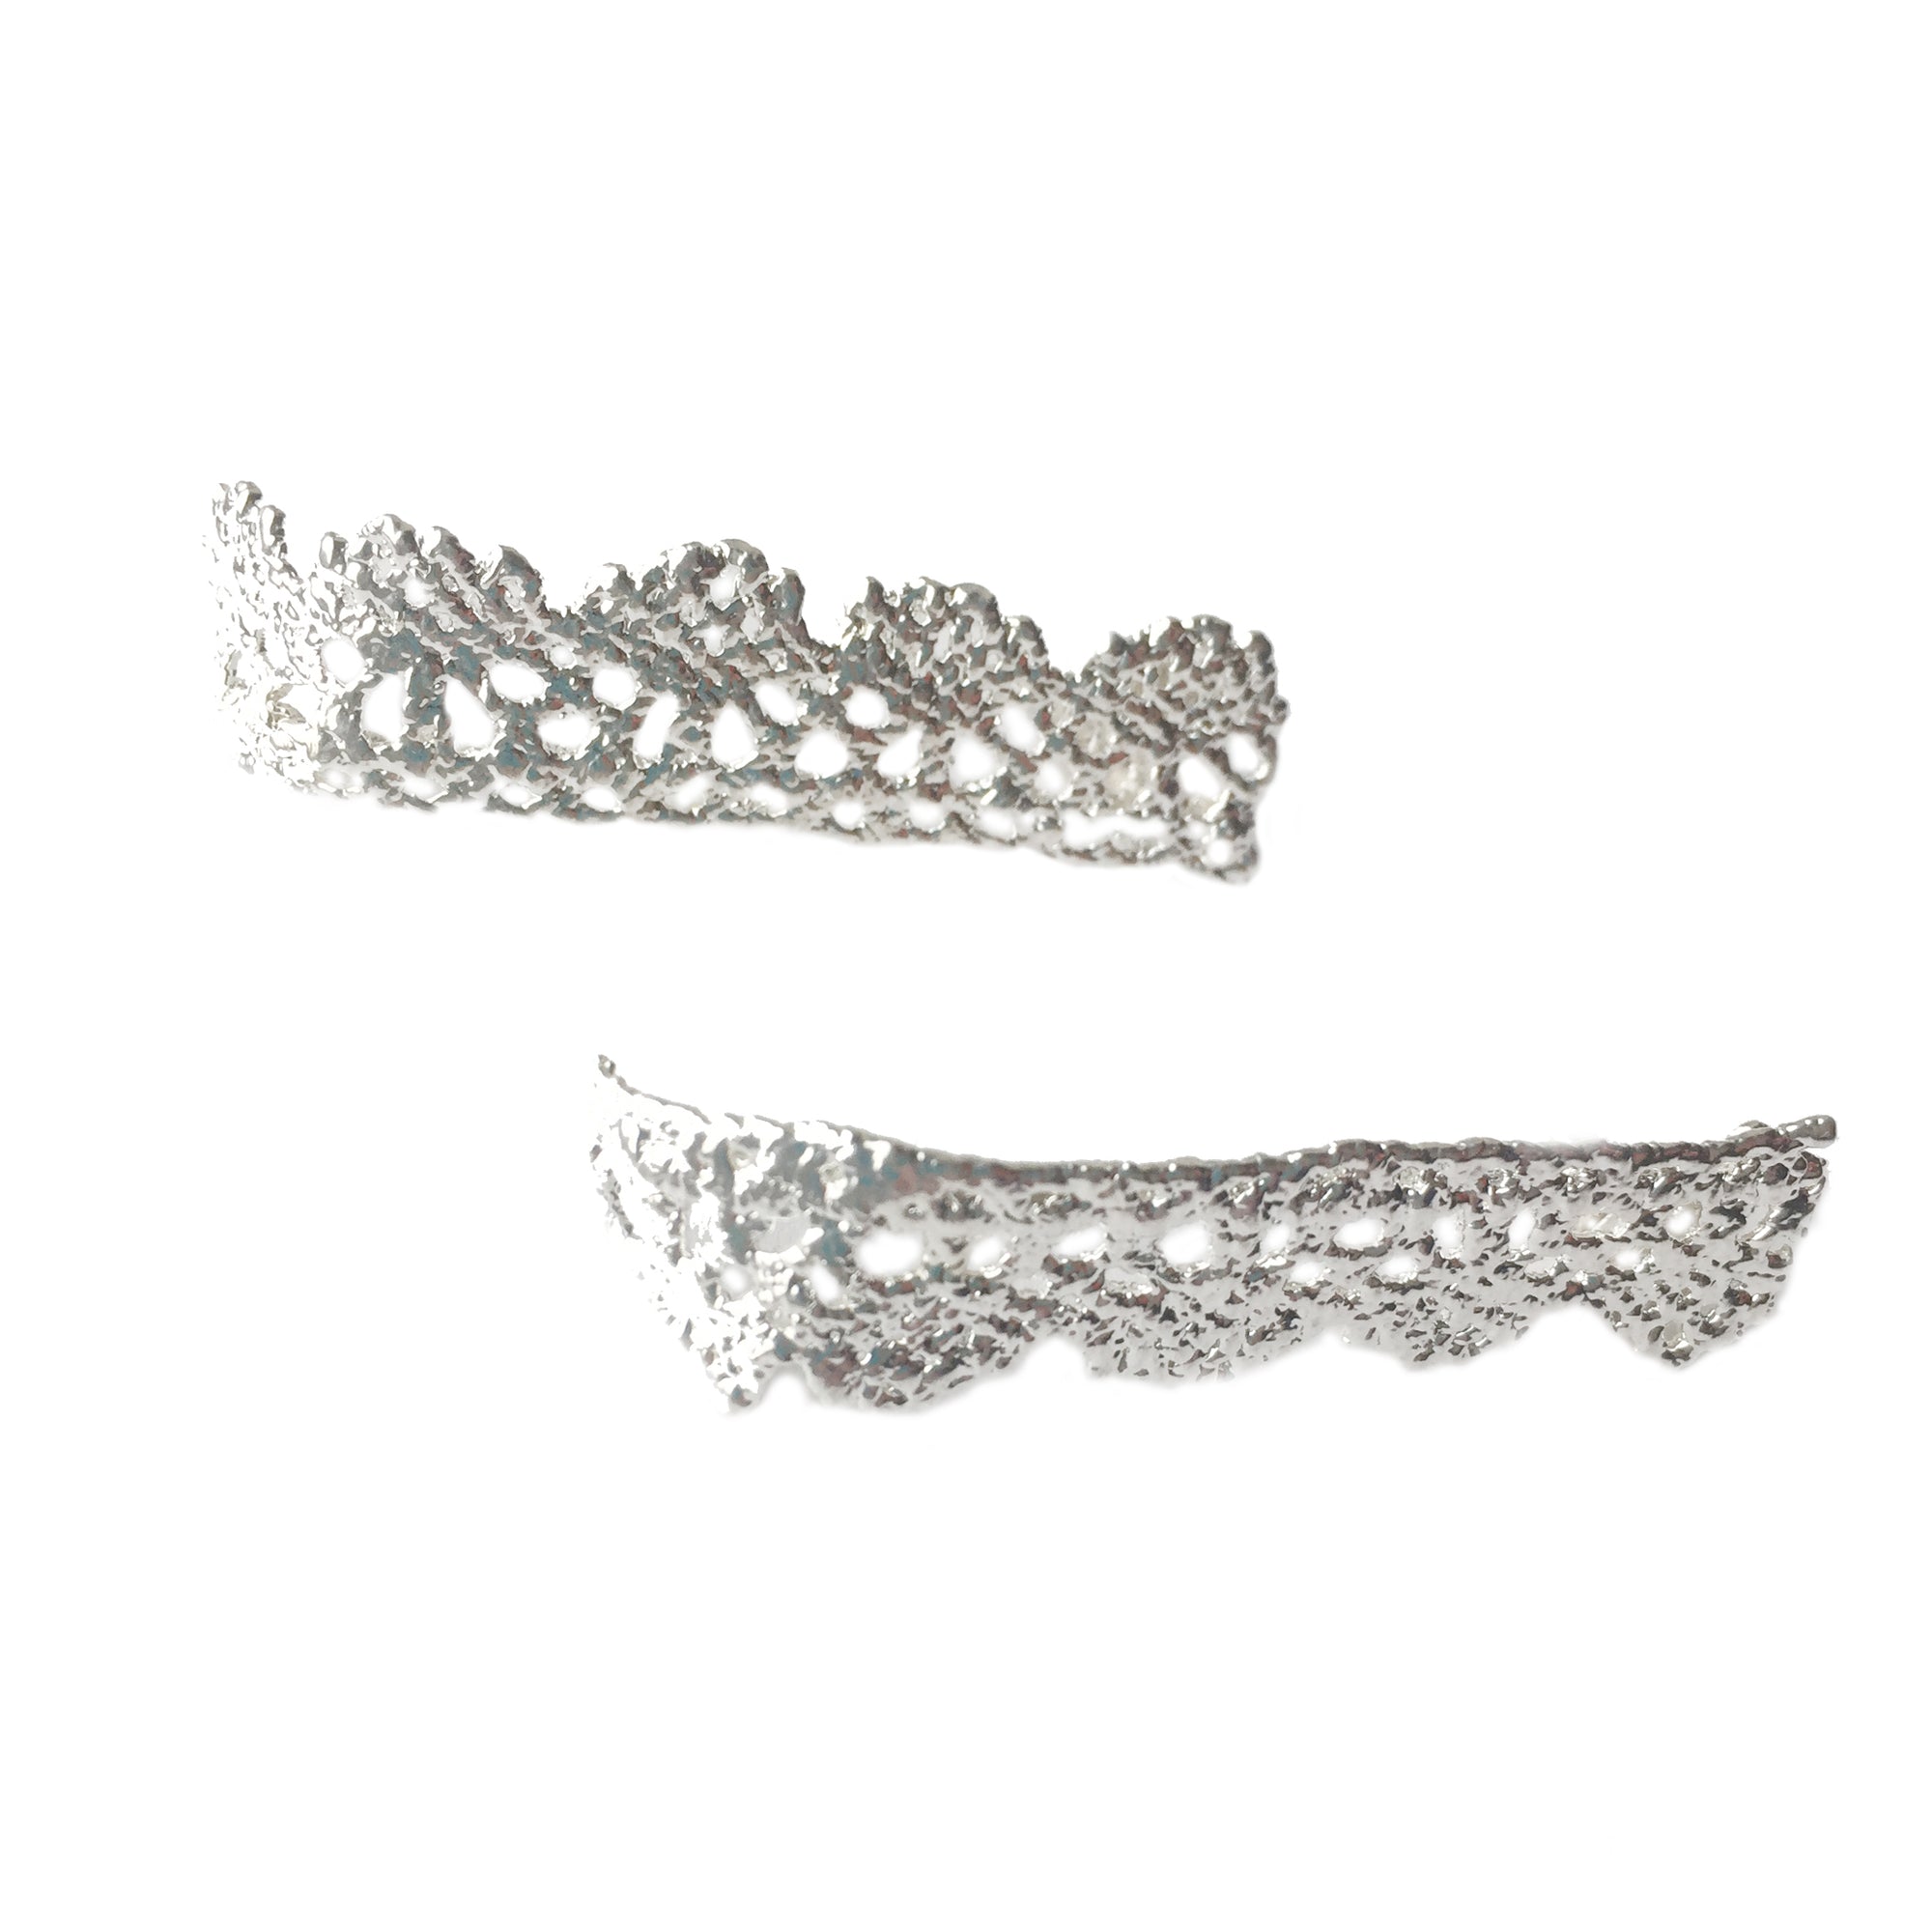 Elegant lace earrings with scalloped edge dipped in sterling silver.